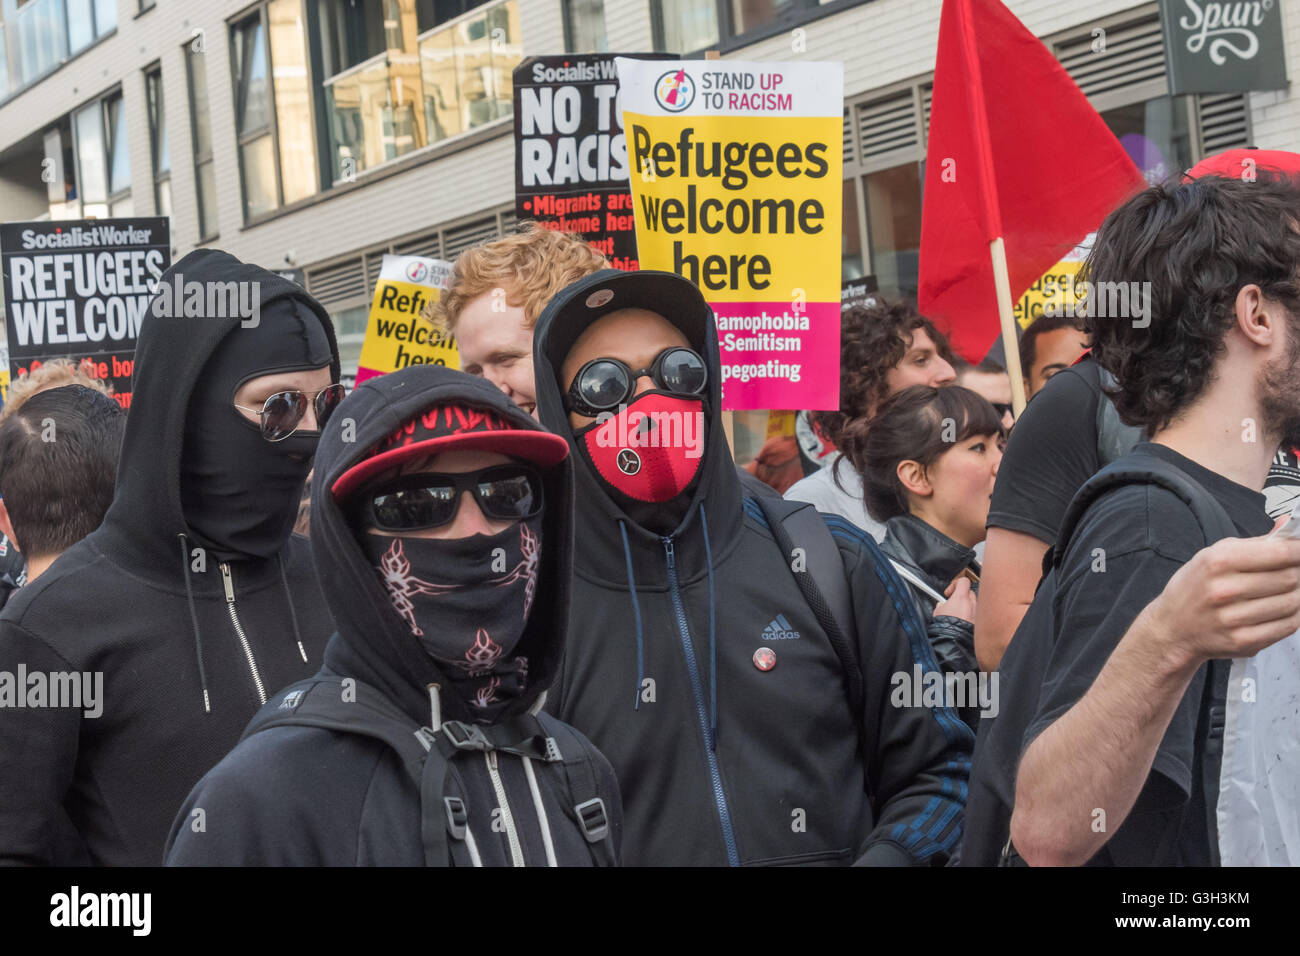 London, UK. June 24th 2016. Protesters, including a group dressed in black and masked march from the rally in Altab Ali Park to the offices of News International on the day after the UK voted to leave the EU. They were protesting against racism, for migrant rights and against fascist violence and argue that migration and immigrants have been attacked and scapegoated not only by both Remain and Leave campaigns but by mainstream parties and media over more than 20 years, stoking up hatred by insisting immigrants are a 'problem'. Peter Marshall/Alamy Live News Stock Photo